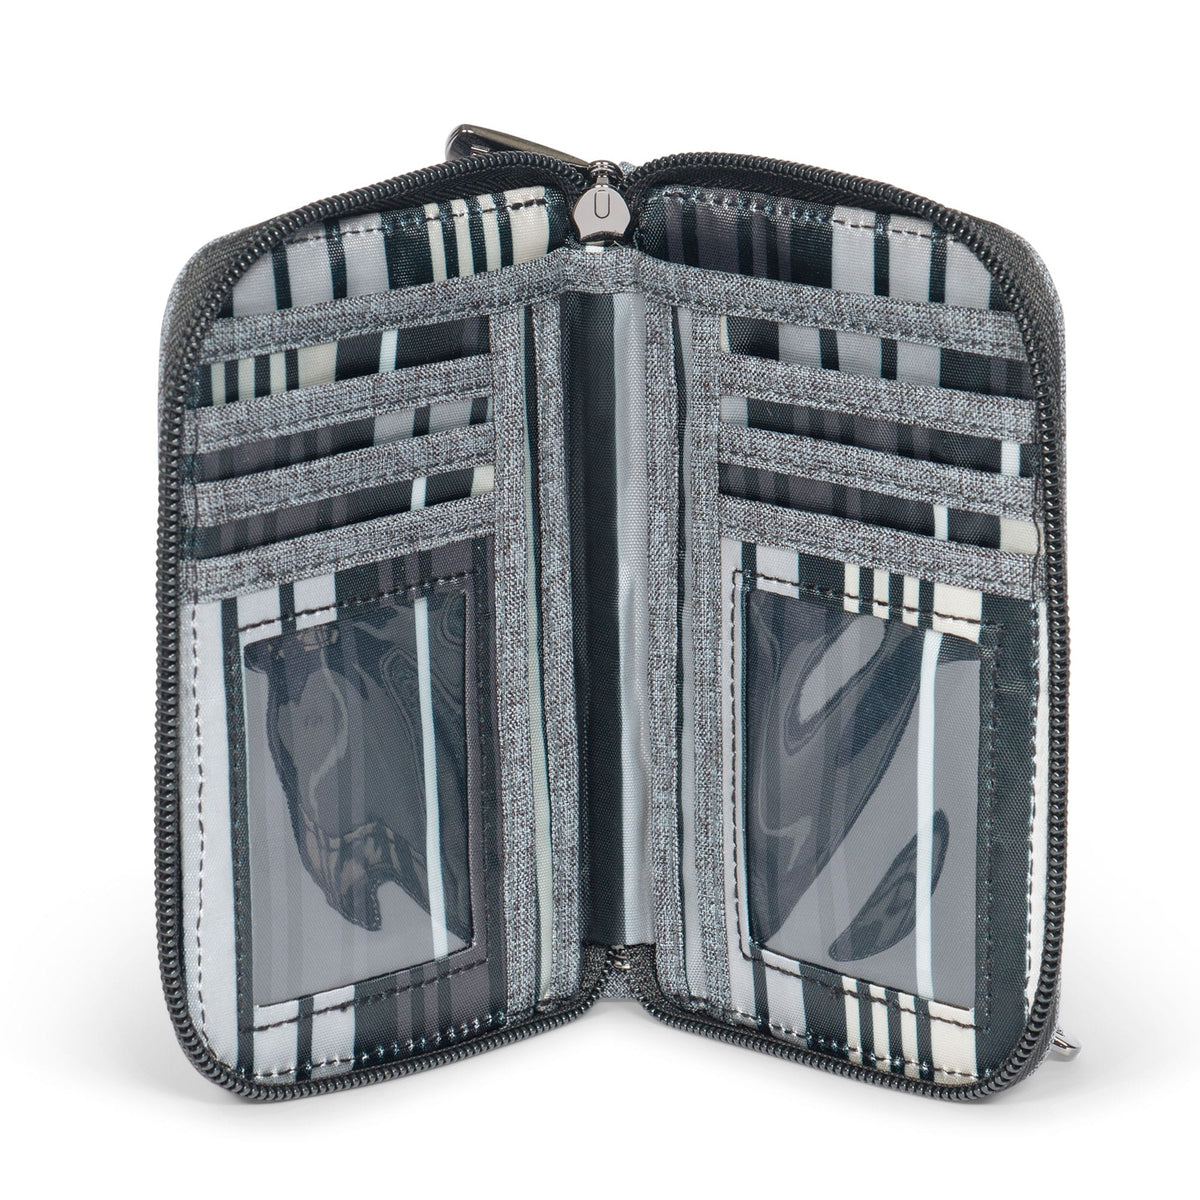 Rodeo 2 Compact RFID Wallet